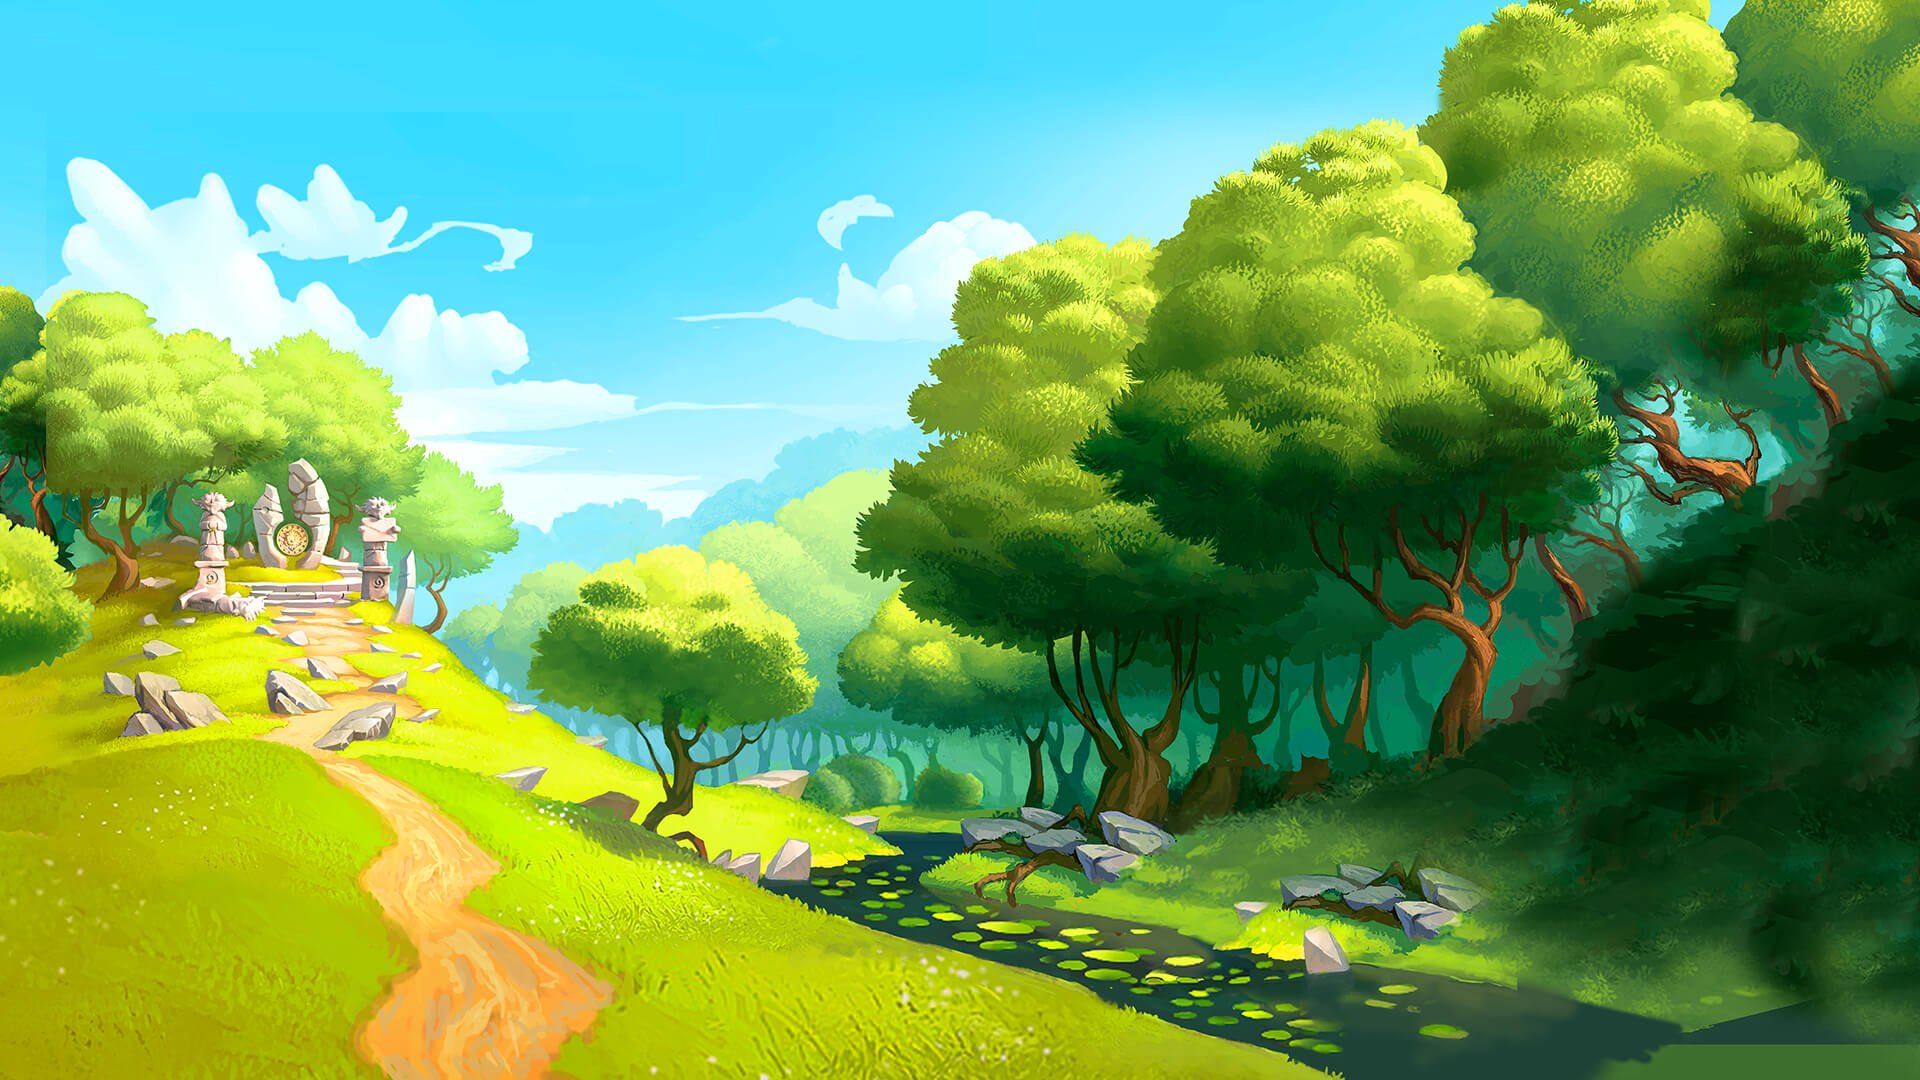 Game hight resolution background Gnome Wood